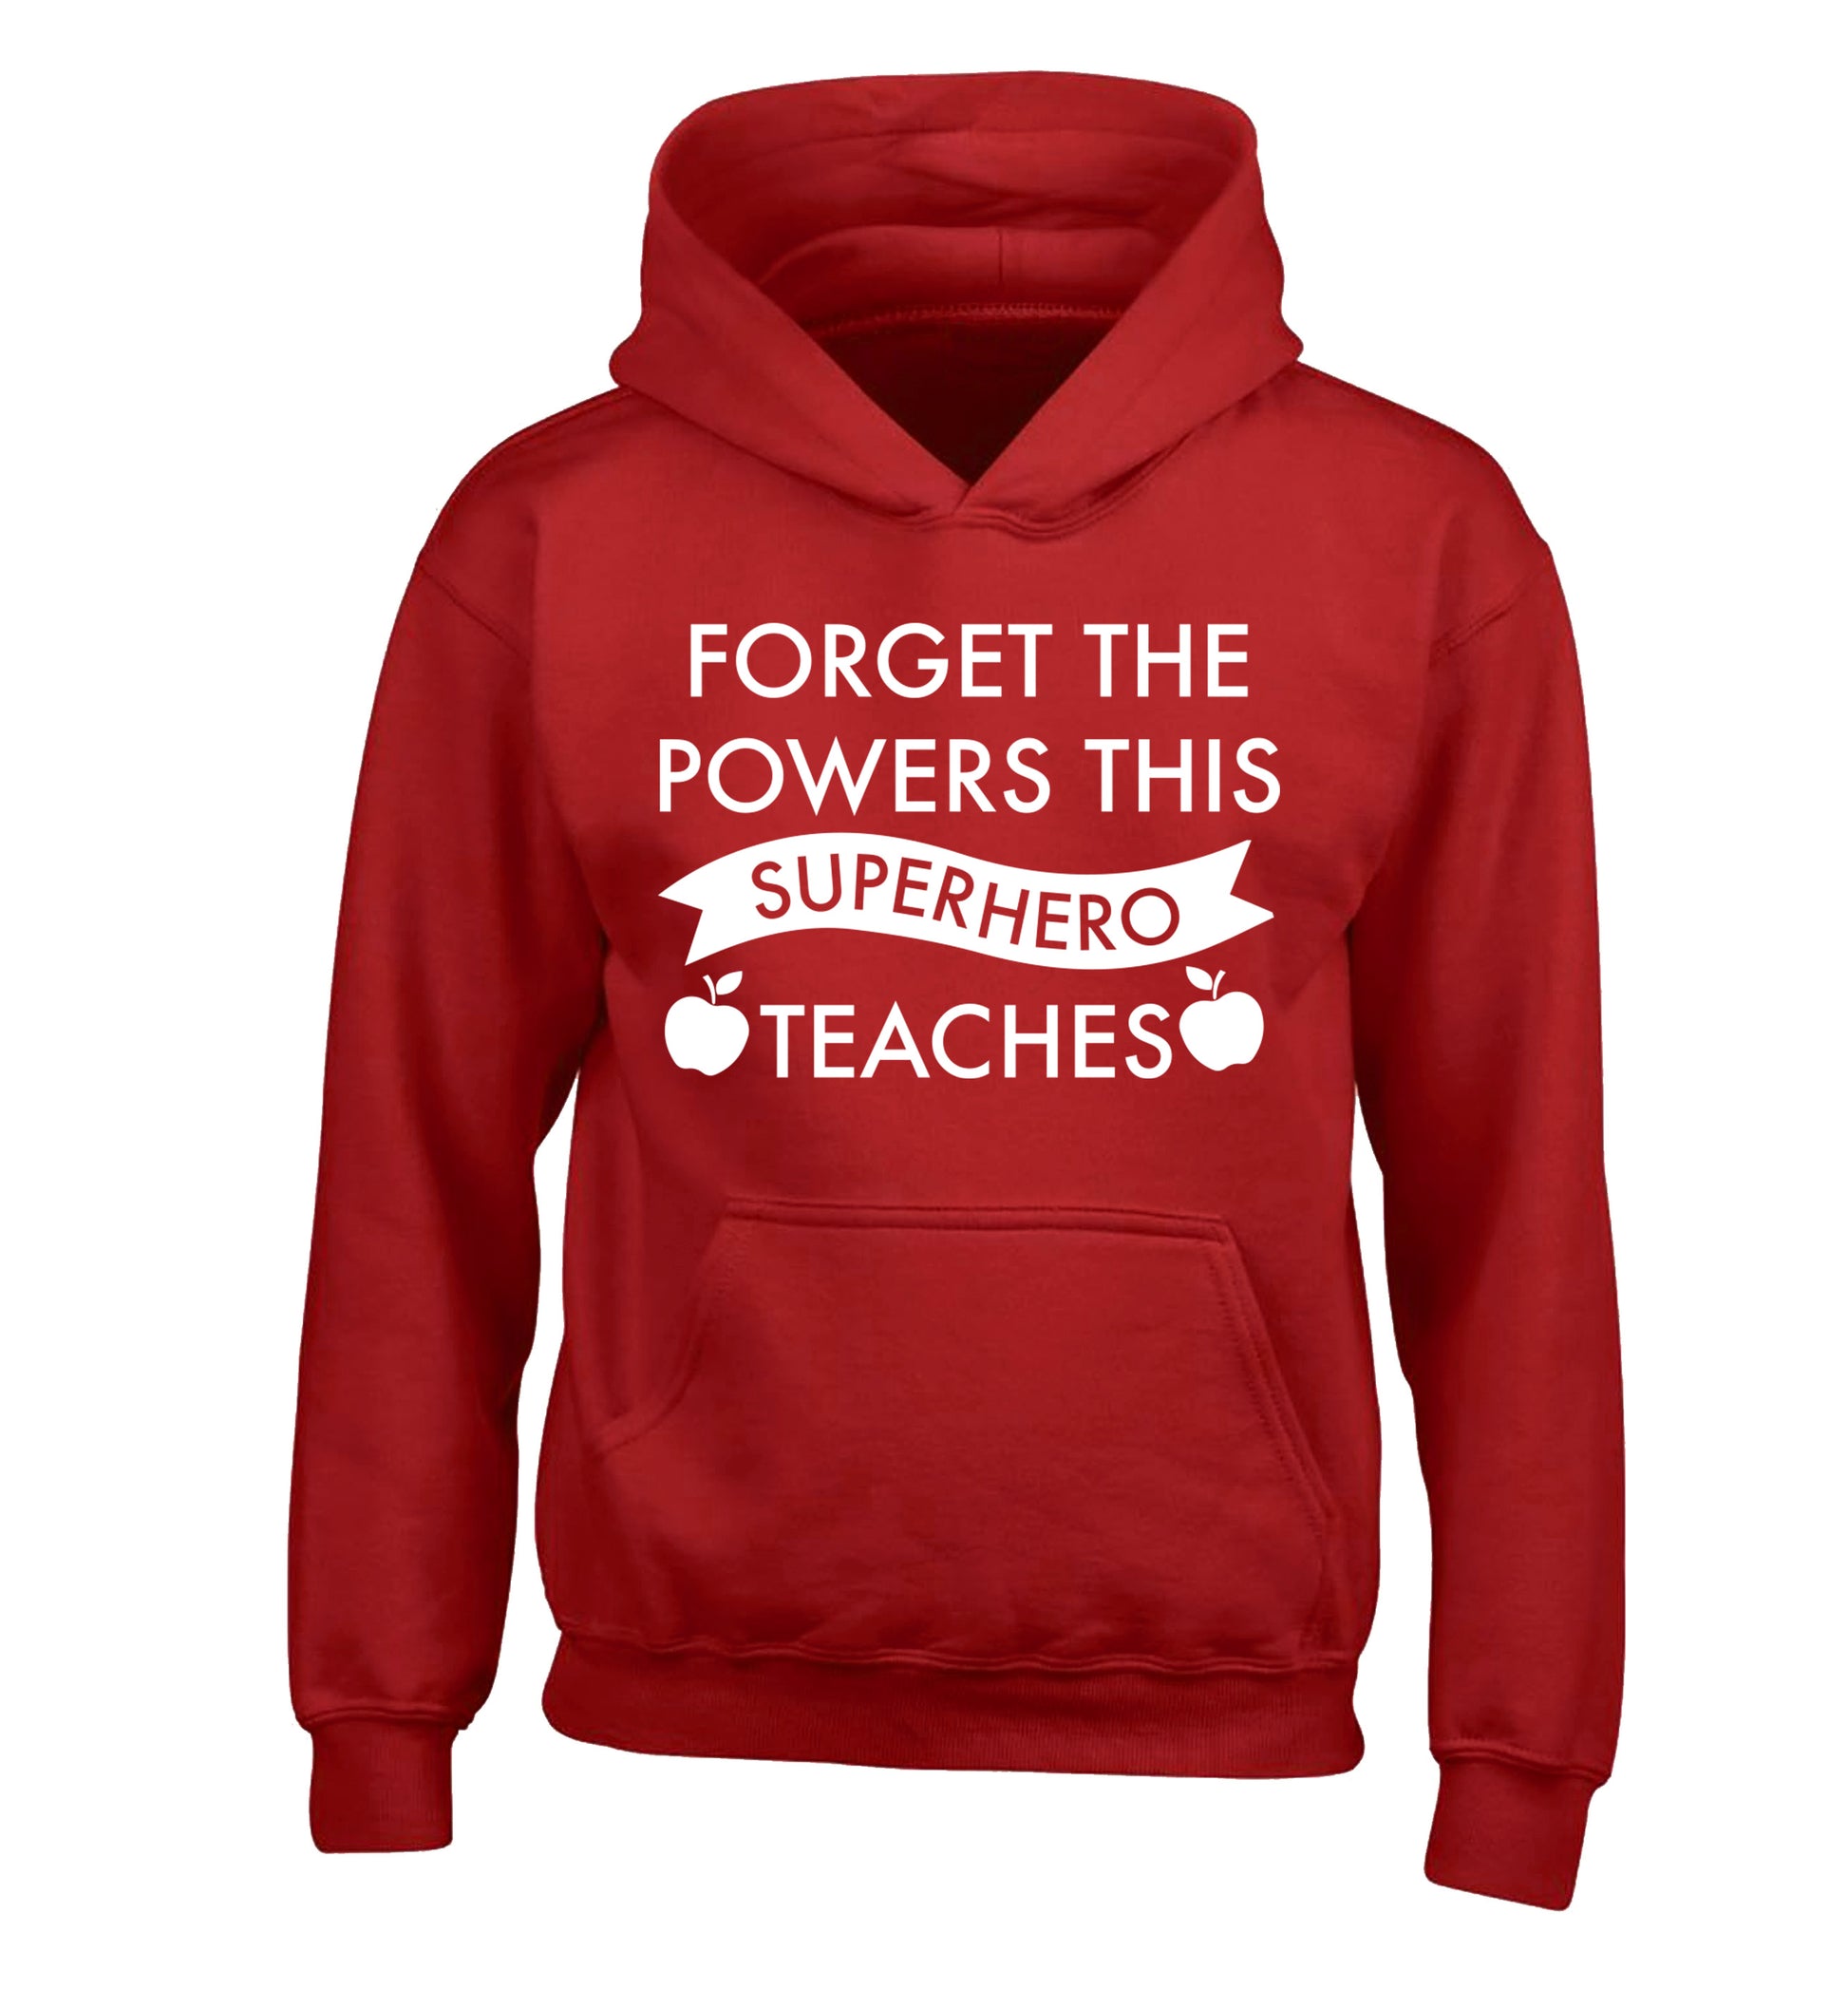 Forget the powers this superhero teaches children's red hoodie 12-13 Years